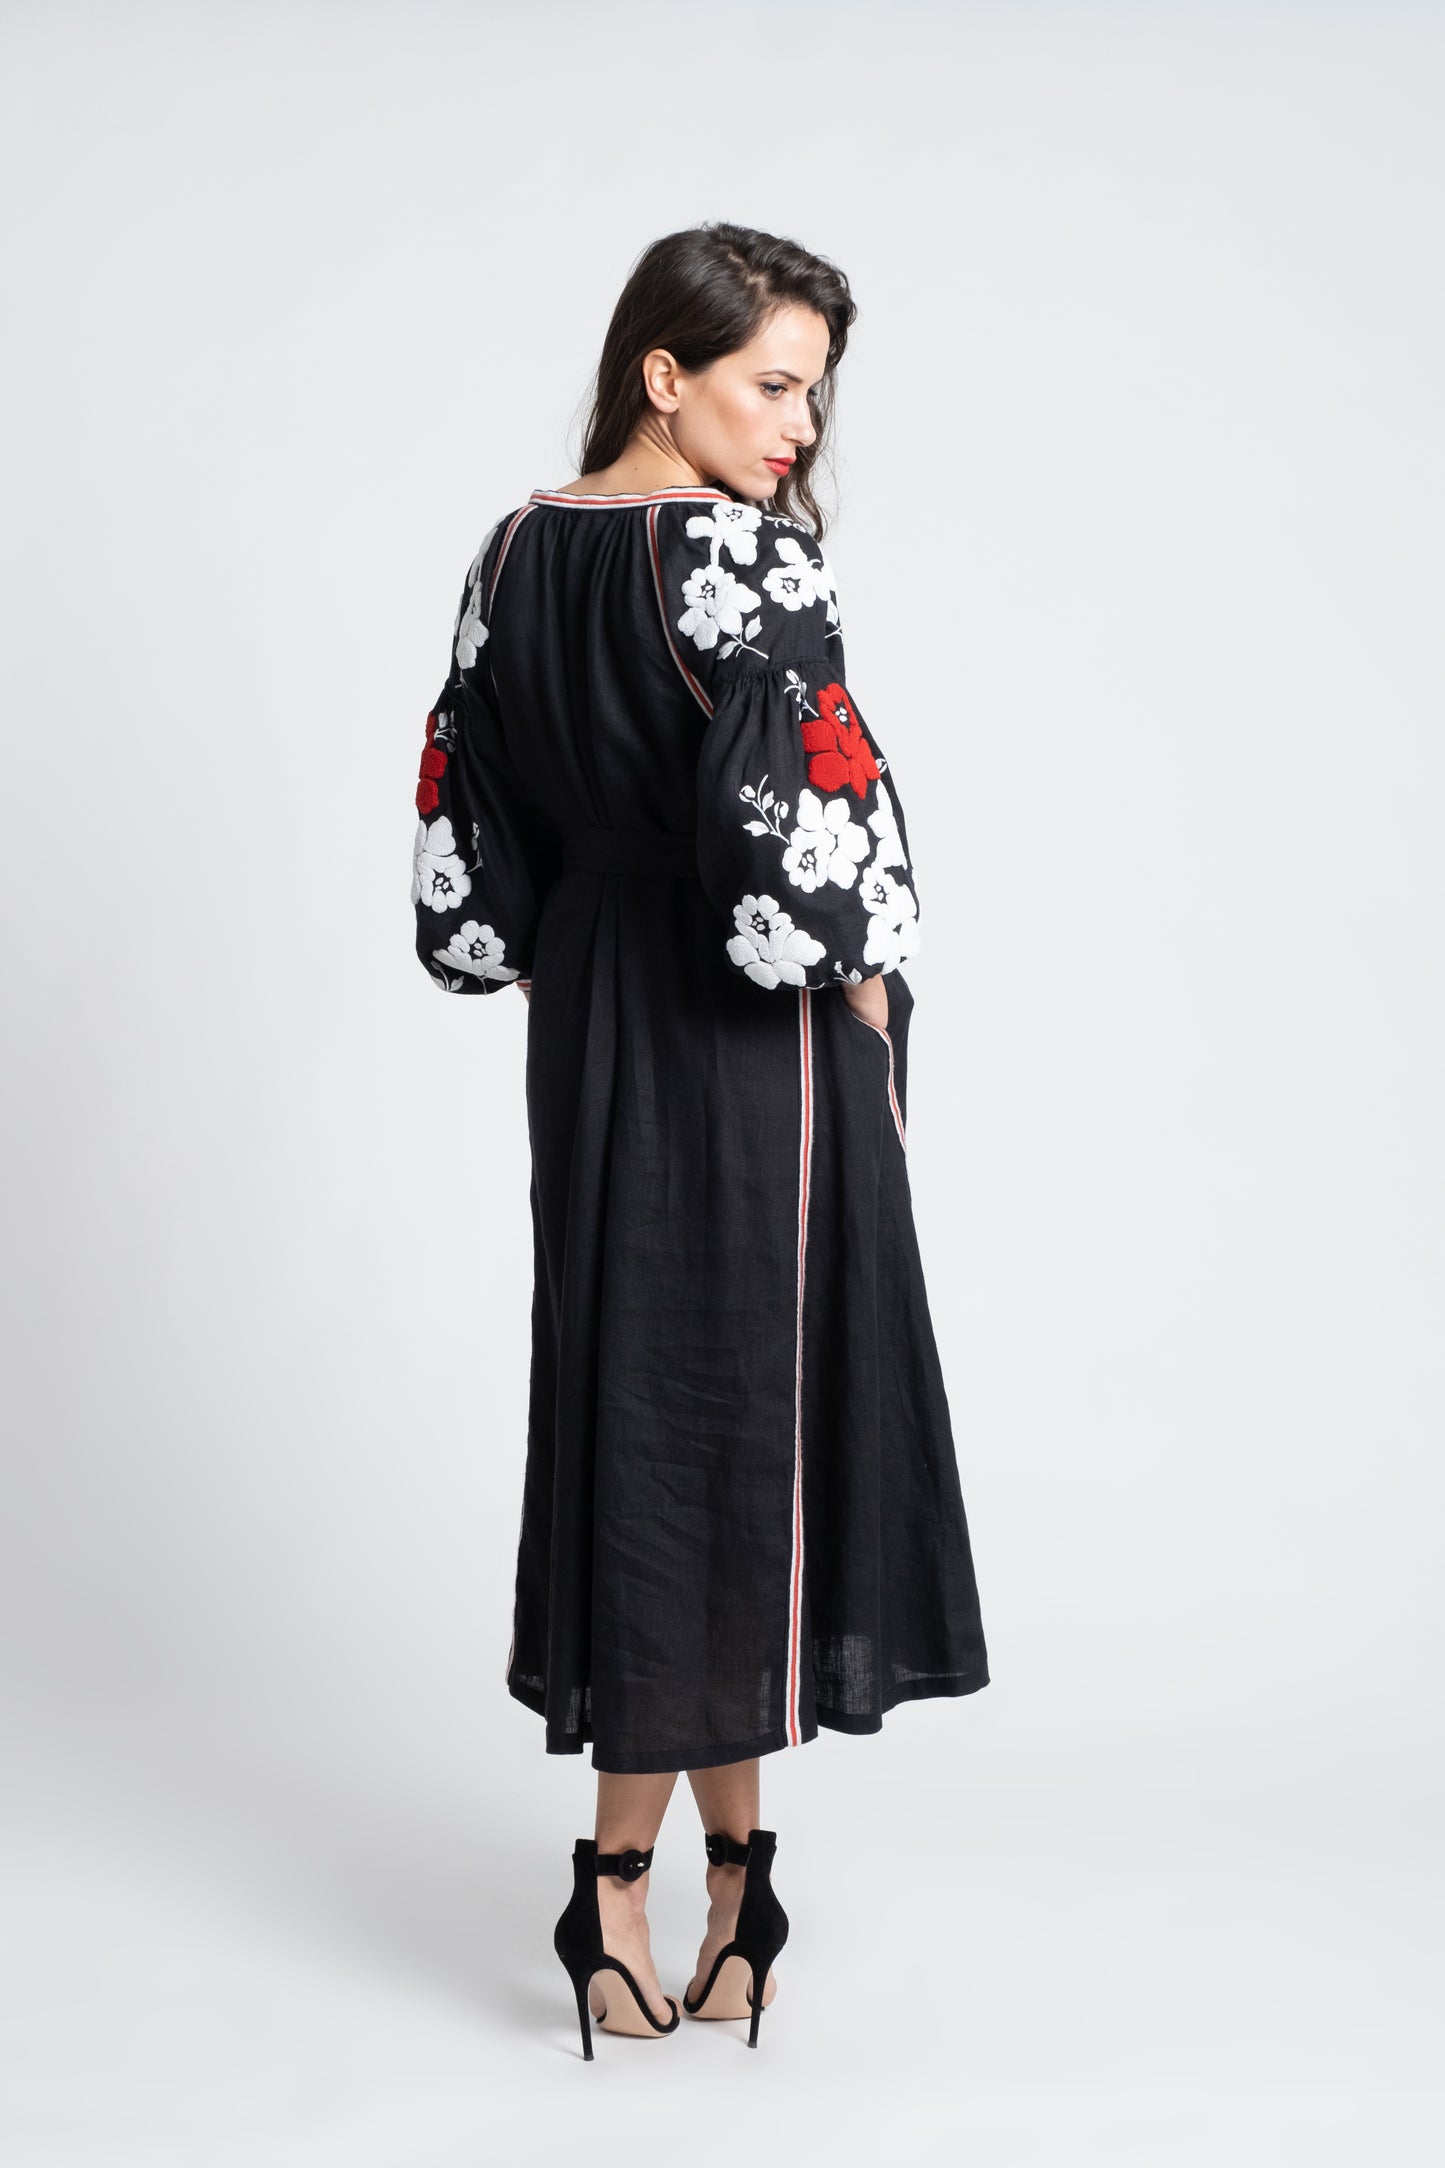 Malibu: Black linen belted dress embroidered in white and red with pompons and  mother of pearl buttons.